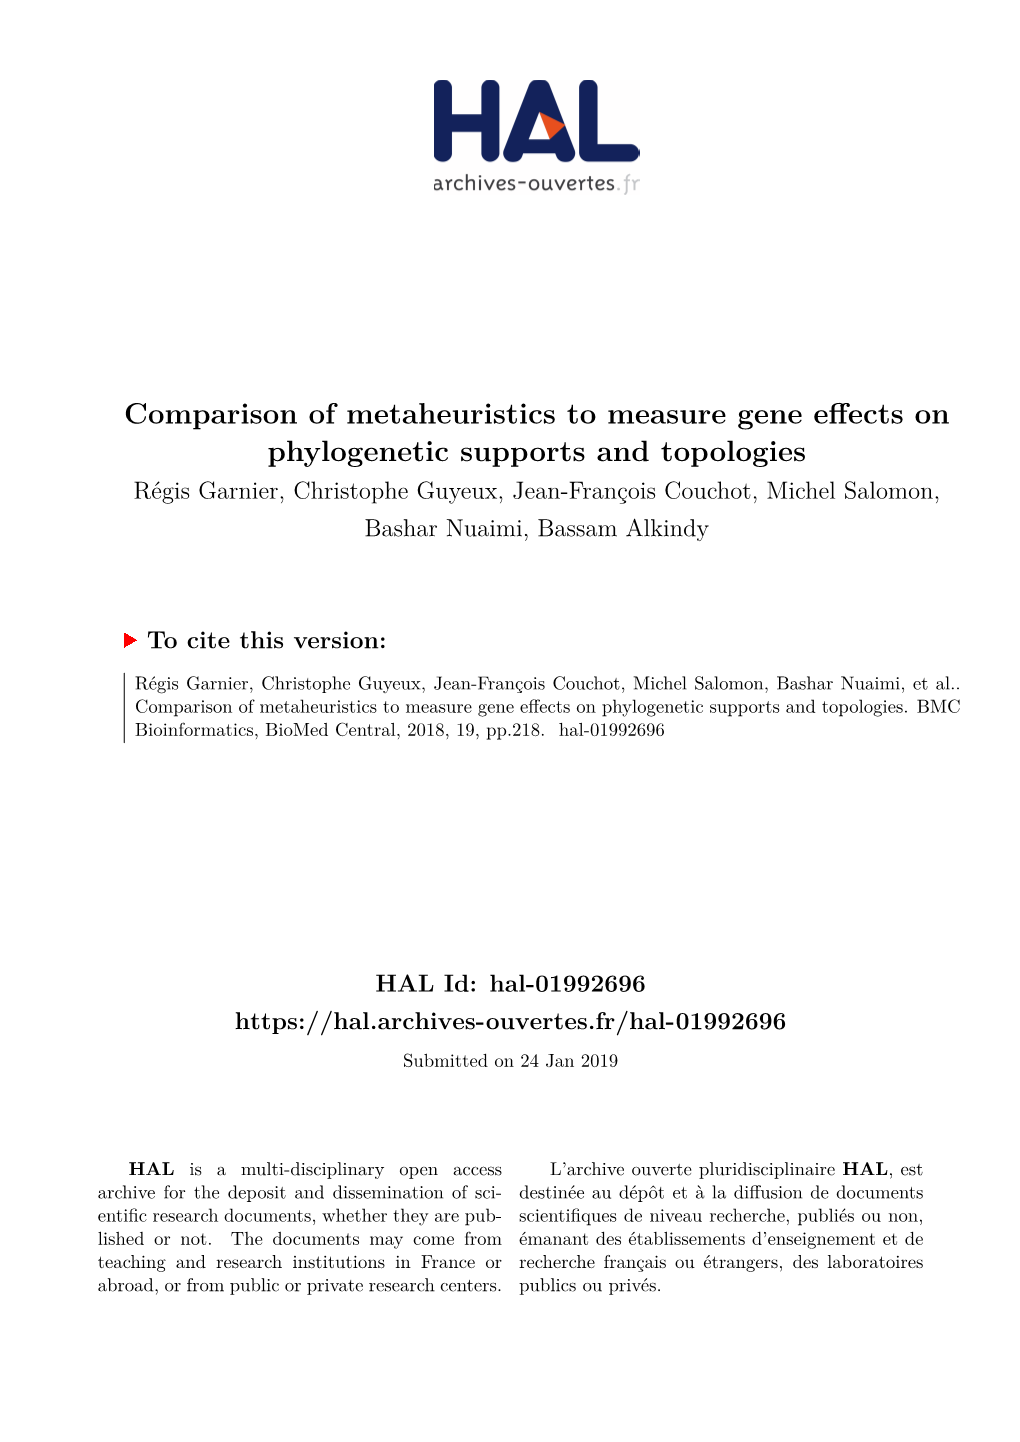 Comparison of Metaheuristics to Measure Gene Effects On